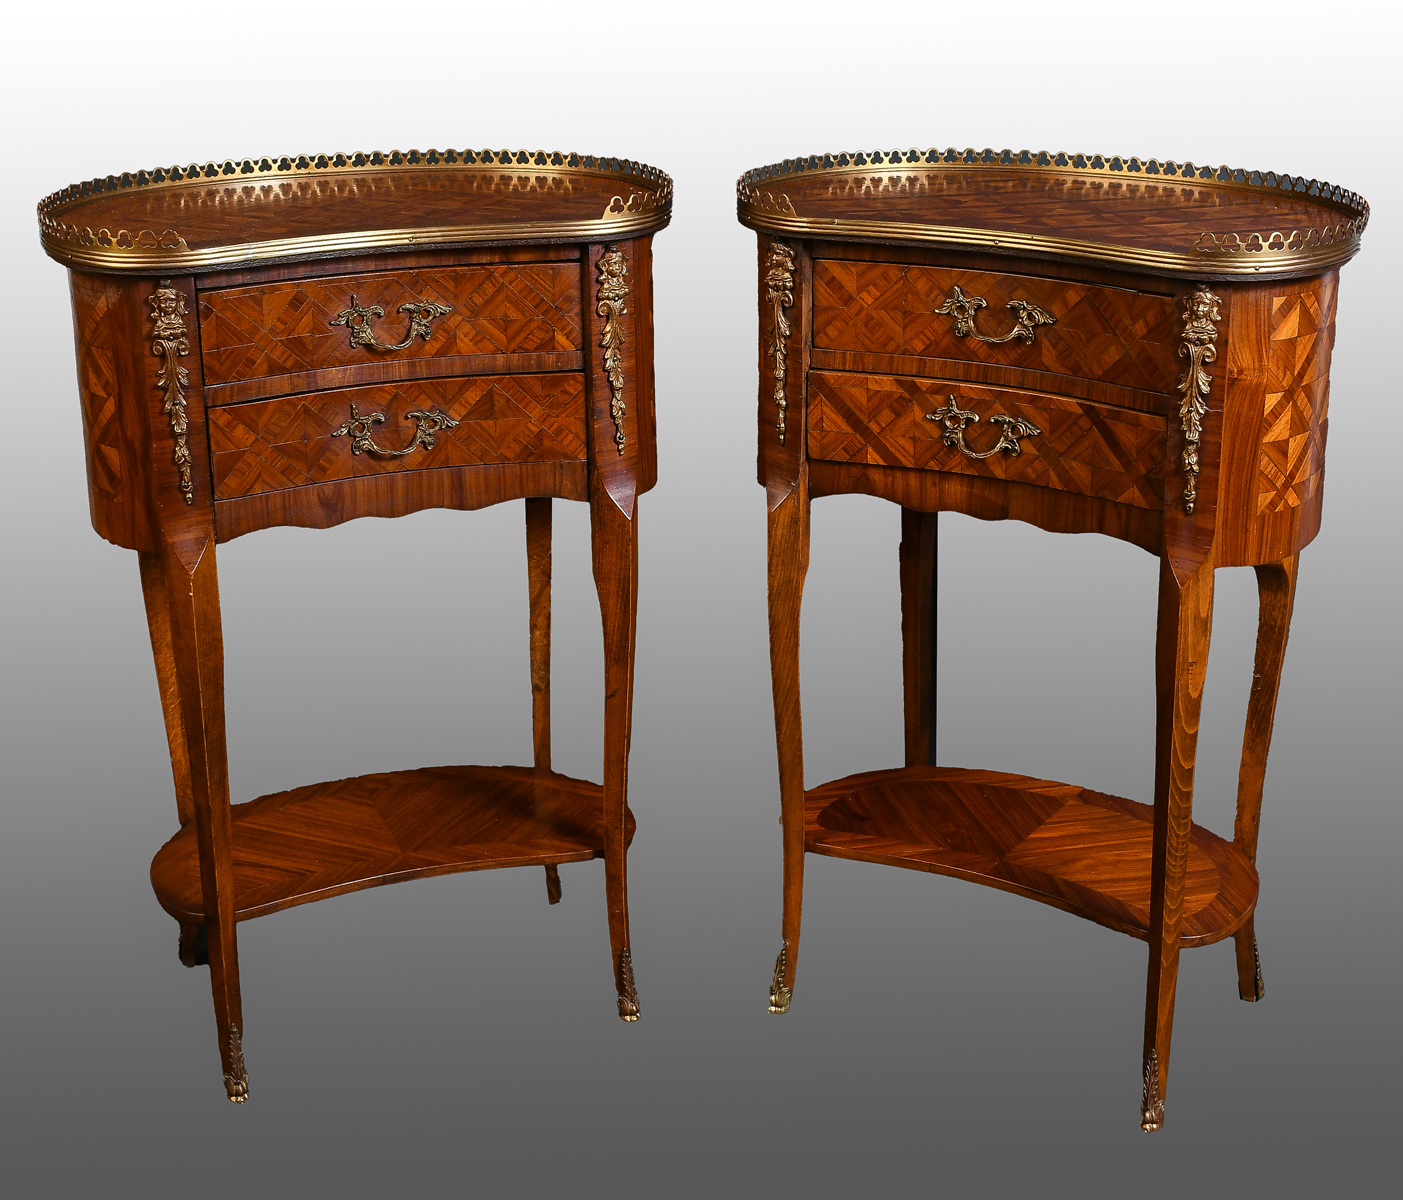 2 FRENCH PARQUETRY INLAID LAMP 36b328